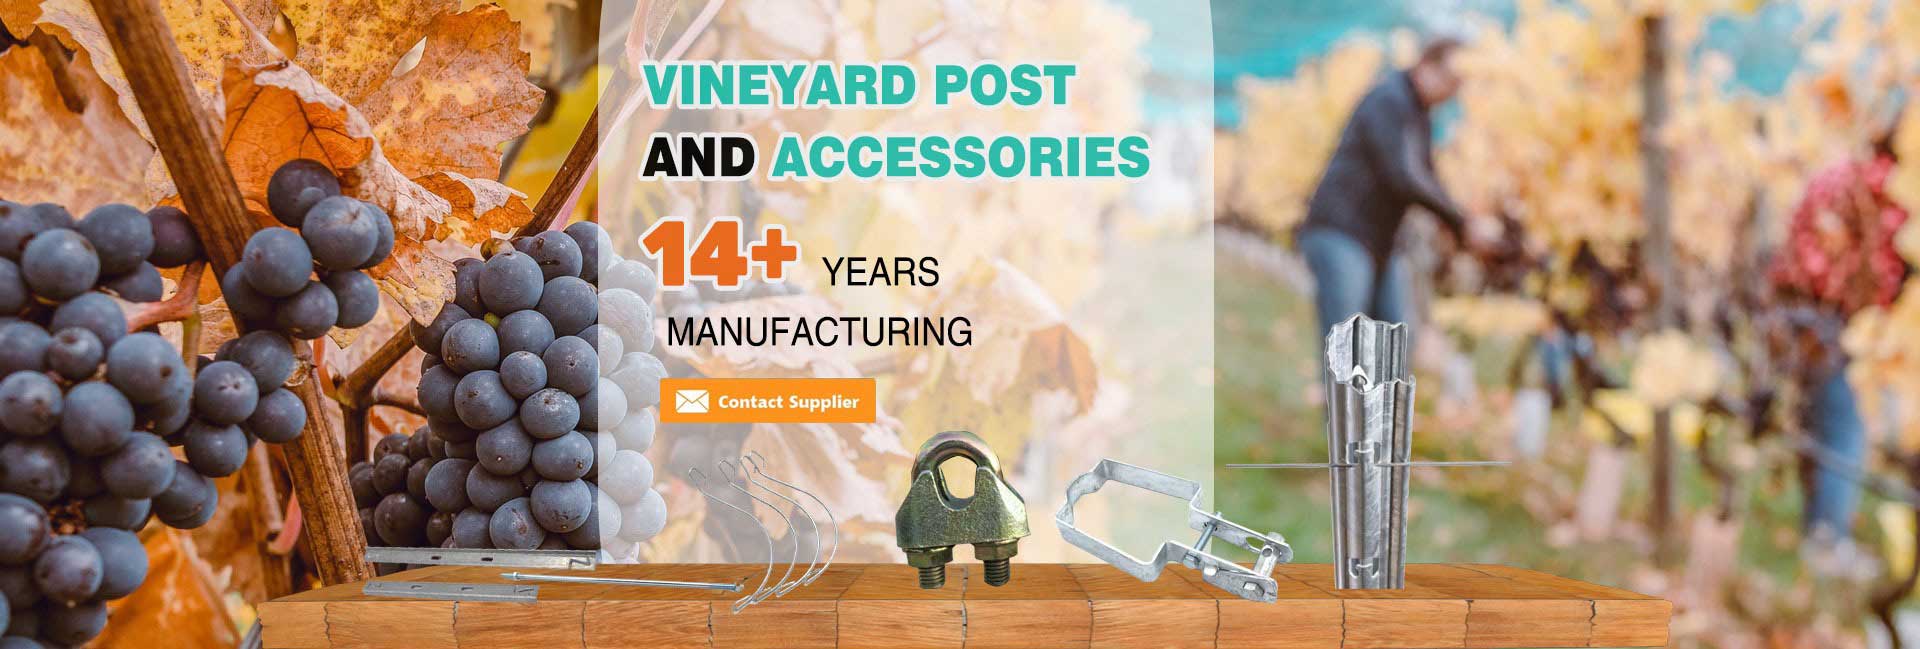 vineyard post and accessory